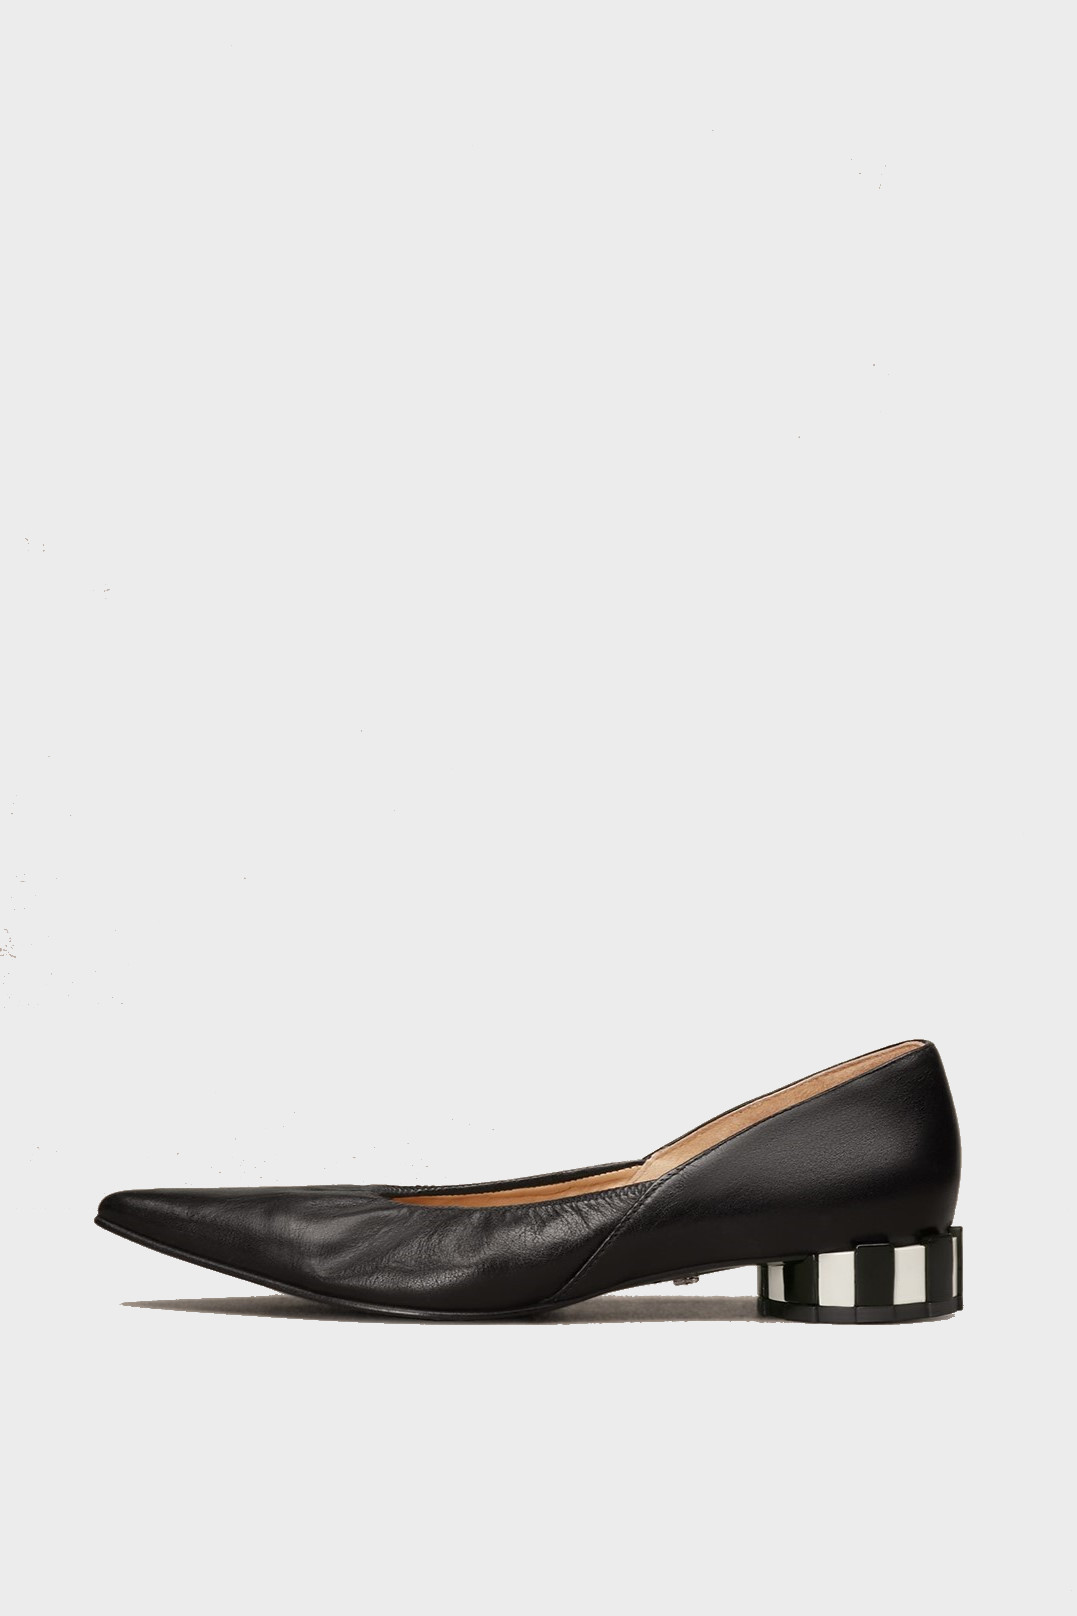 AMI PARIS Pointed Toe Pleated Shoes in Black 37